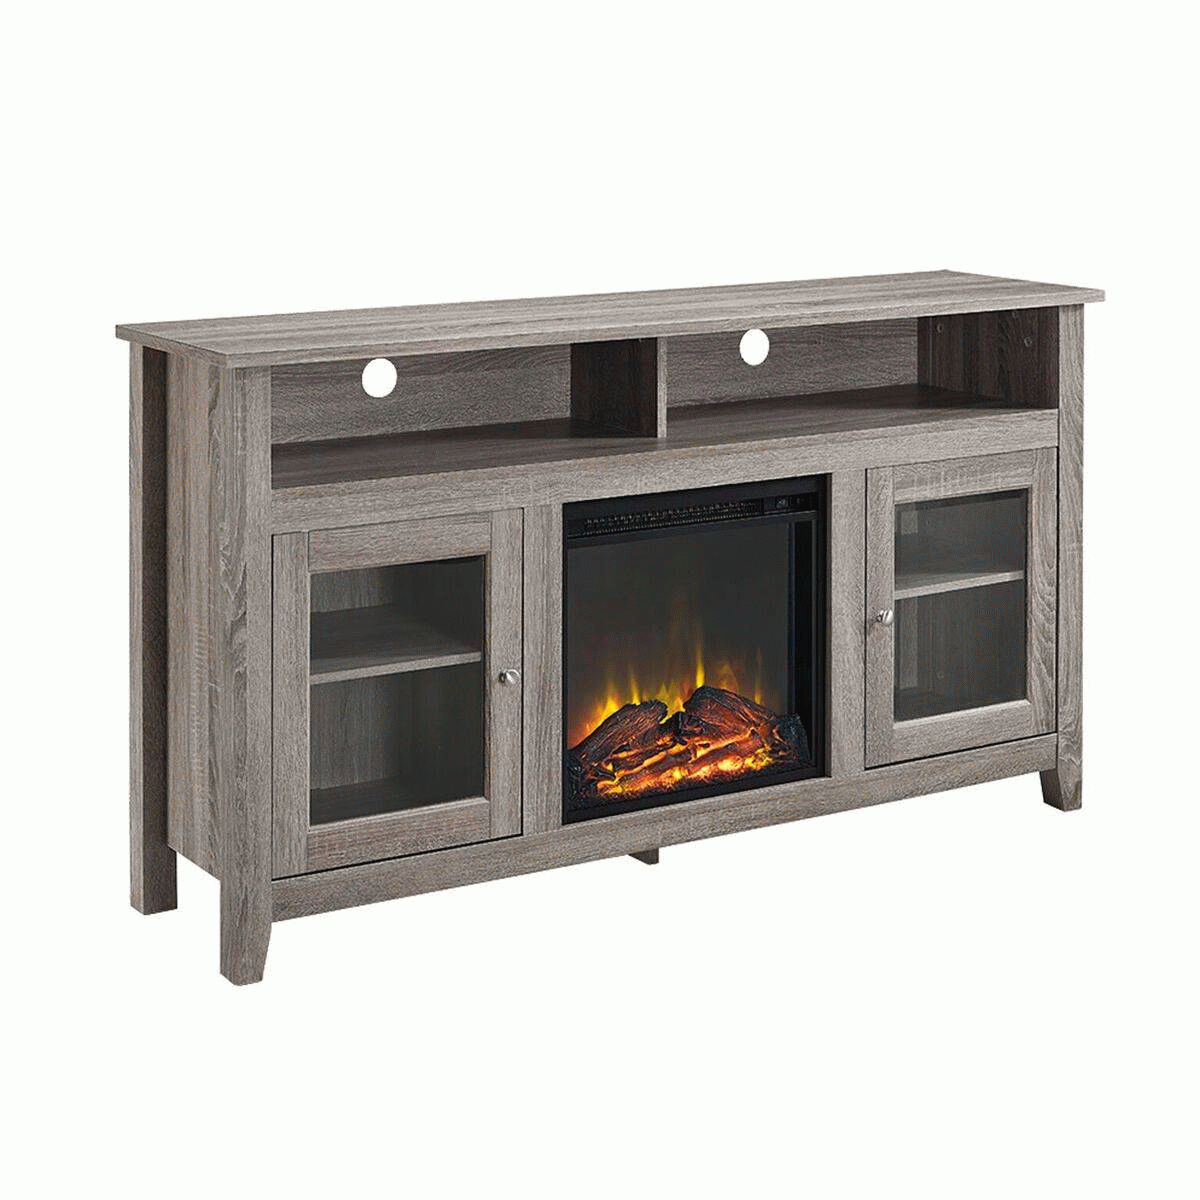 58" Wood Highboy Fireplace Tv Stand – Driftwood – Walker Edison W58Fp18Hbag Pertaining To Wood Highboy Fireplace Tv Stands (View 4 of 15)